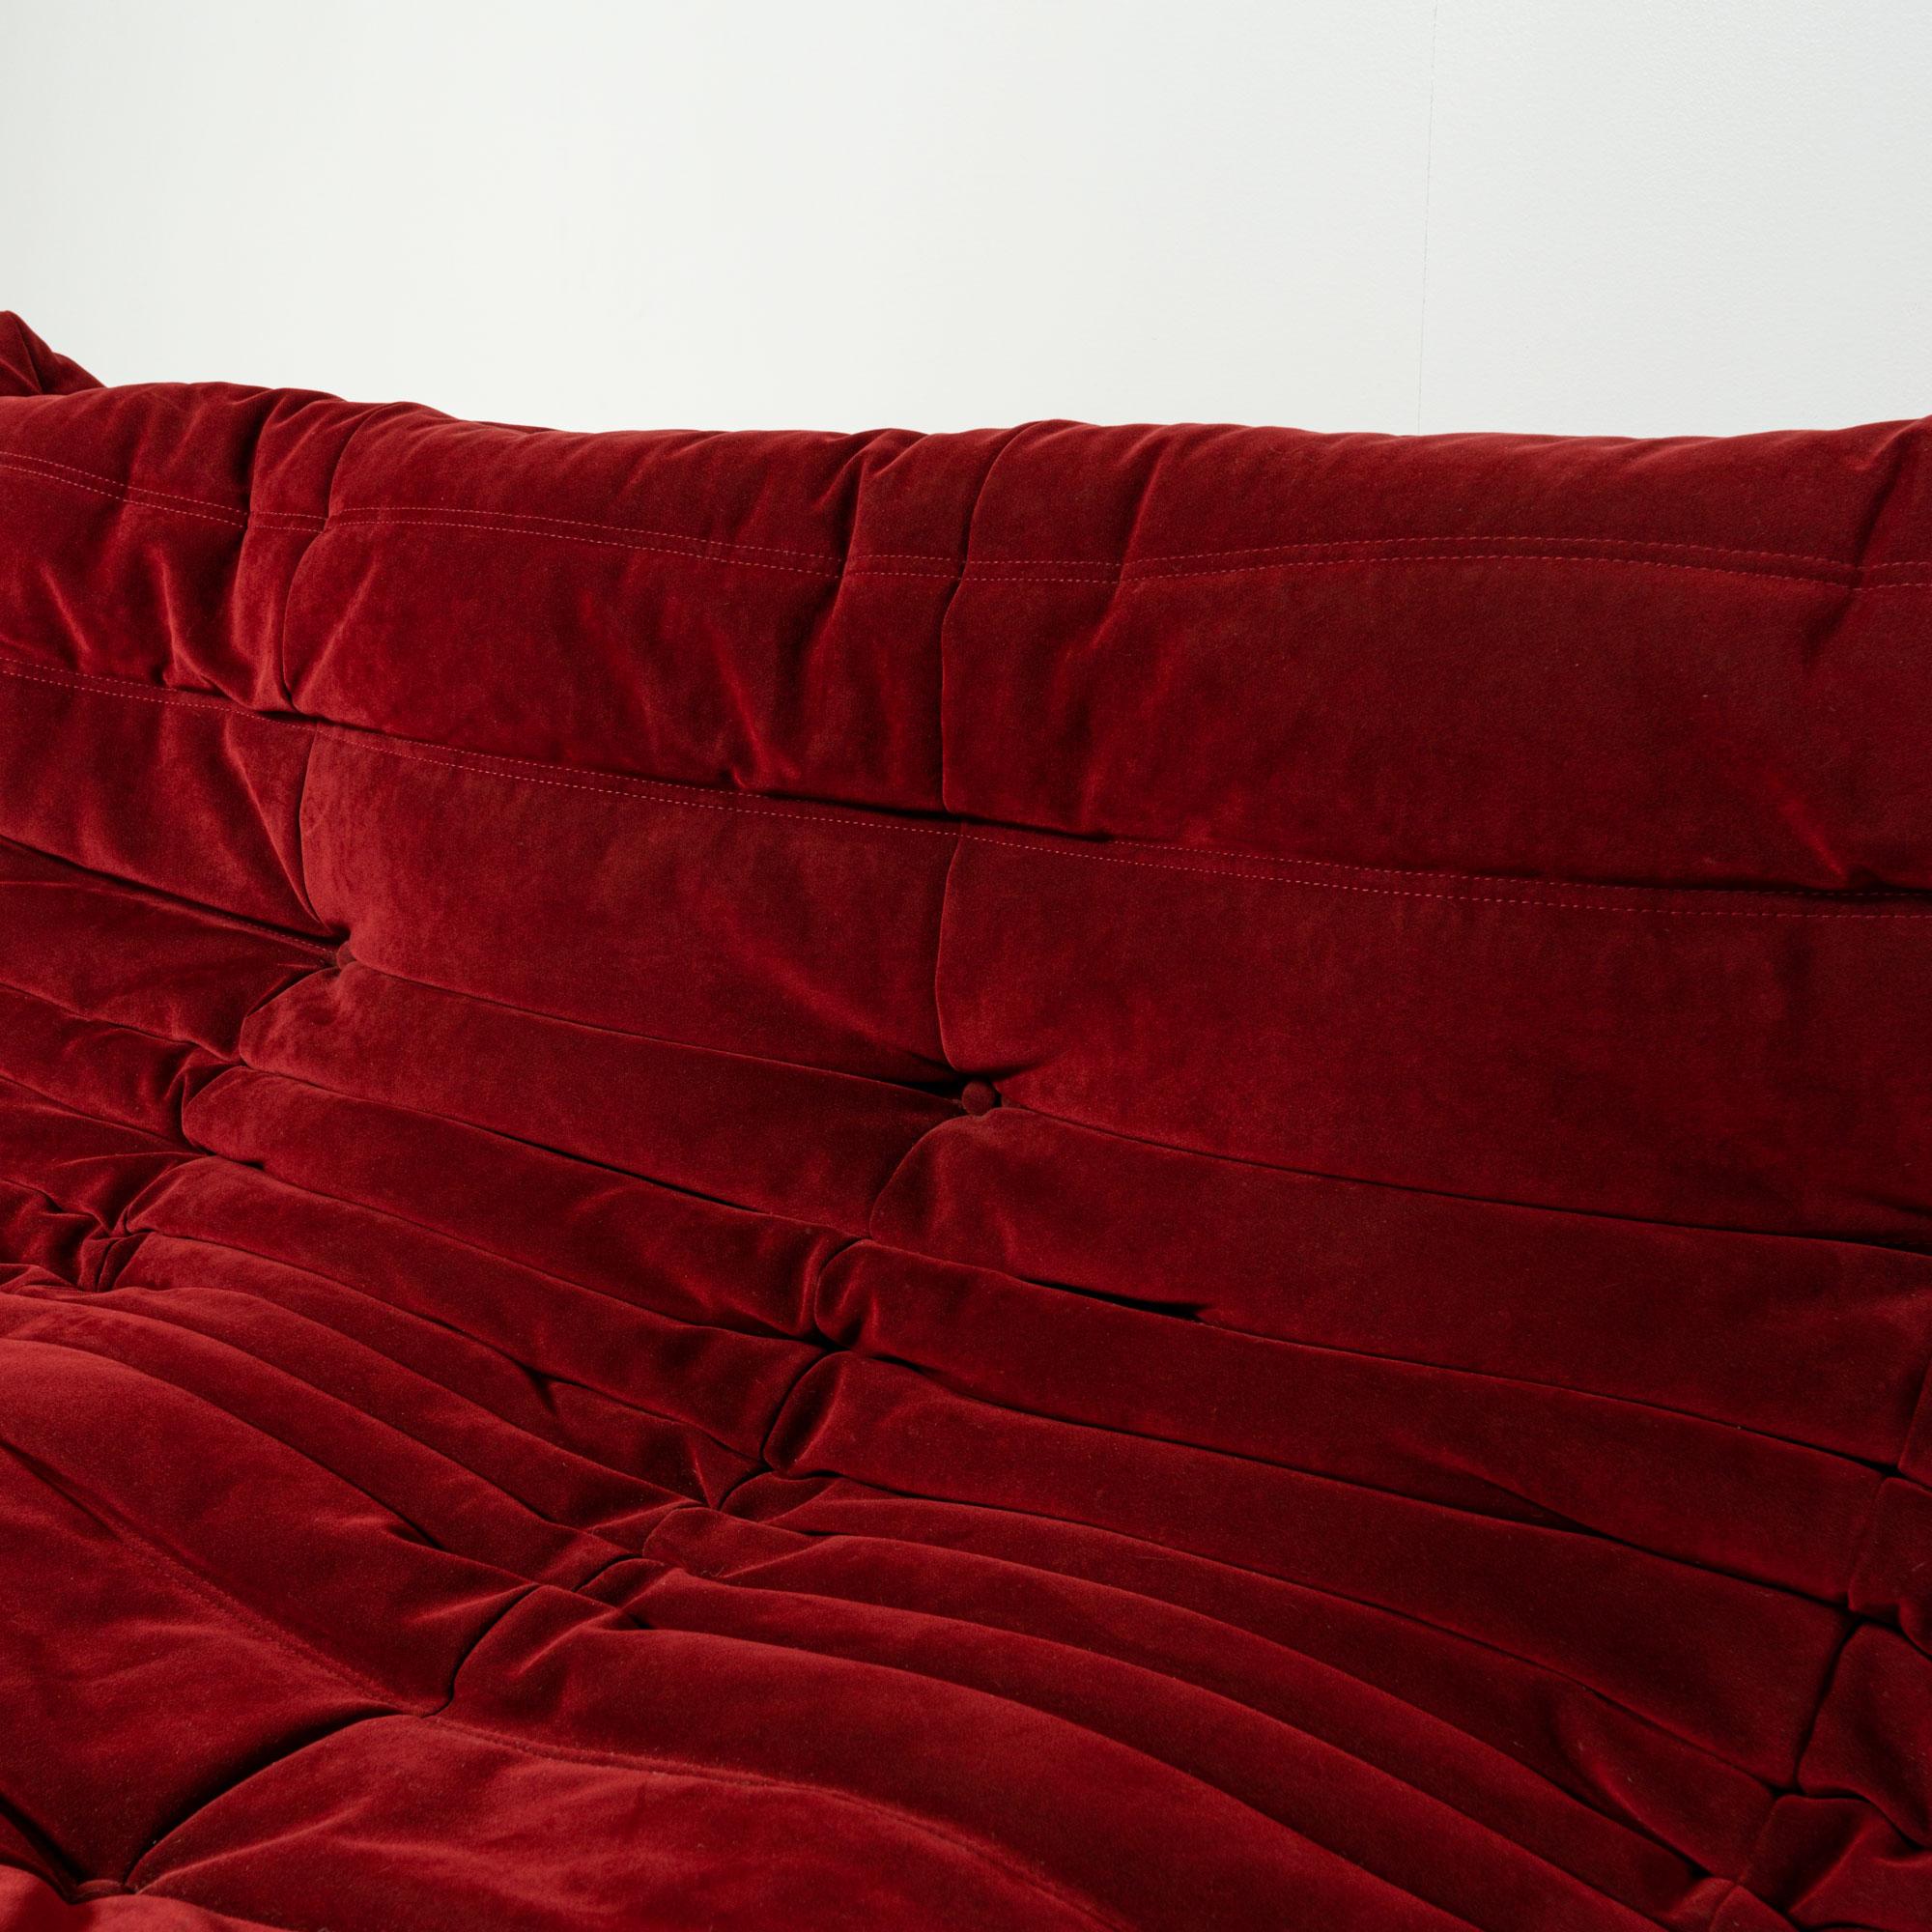 Other Original Michel Ducaroys Togo Sectional 4 pieces in Bordeaux Red Alcantara